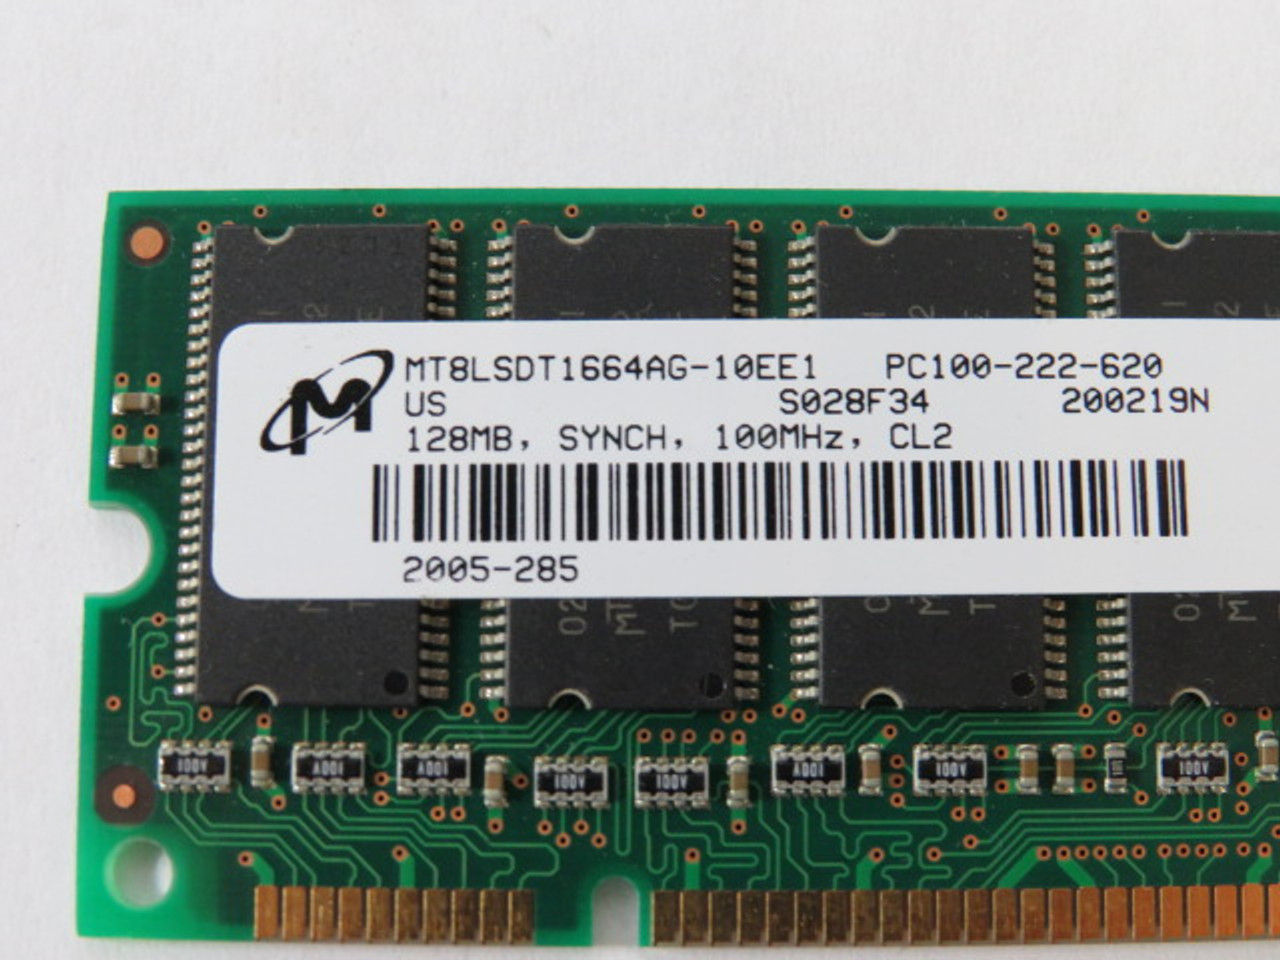 Micron MT8LSDT1664AG-10EE1 SDRAM 168-Pin PC-100 128MB 3.3V USED